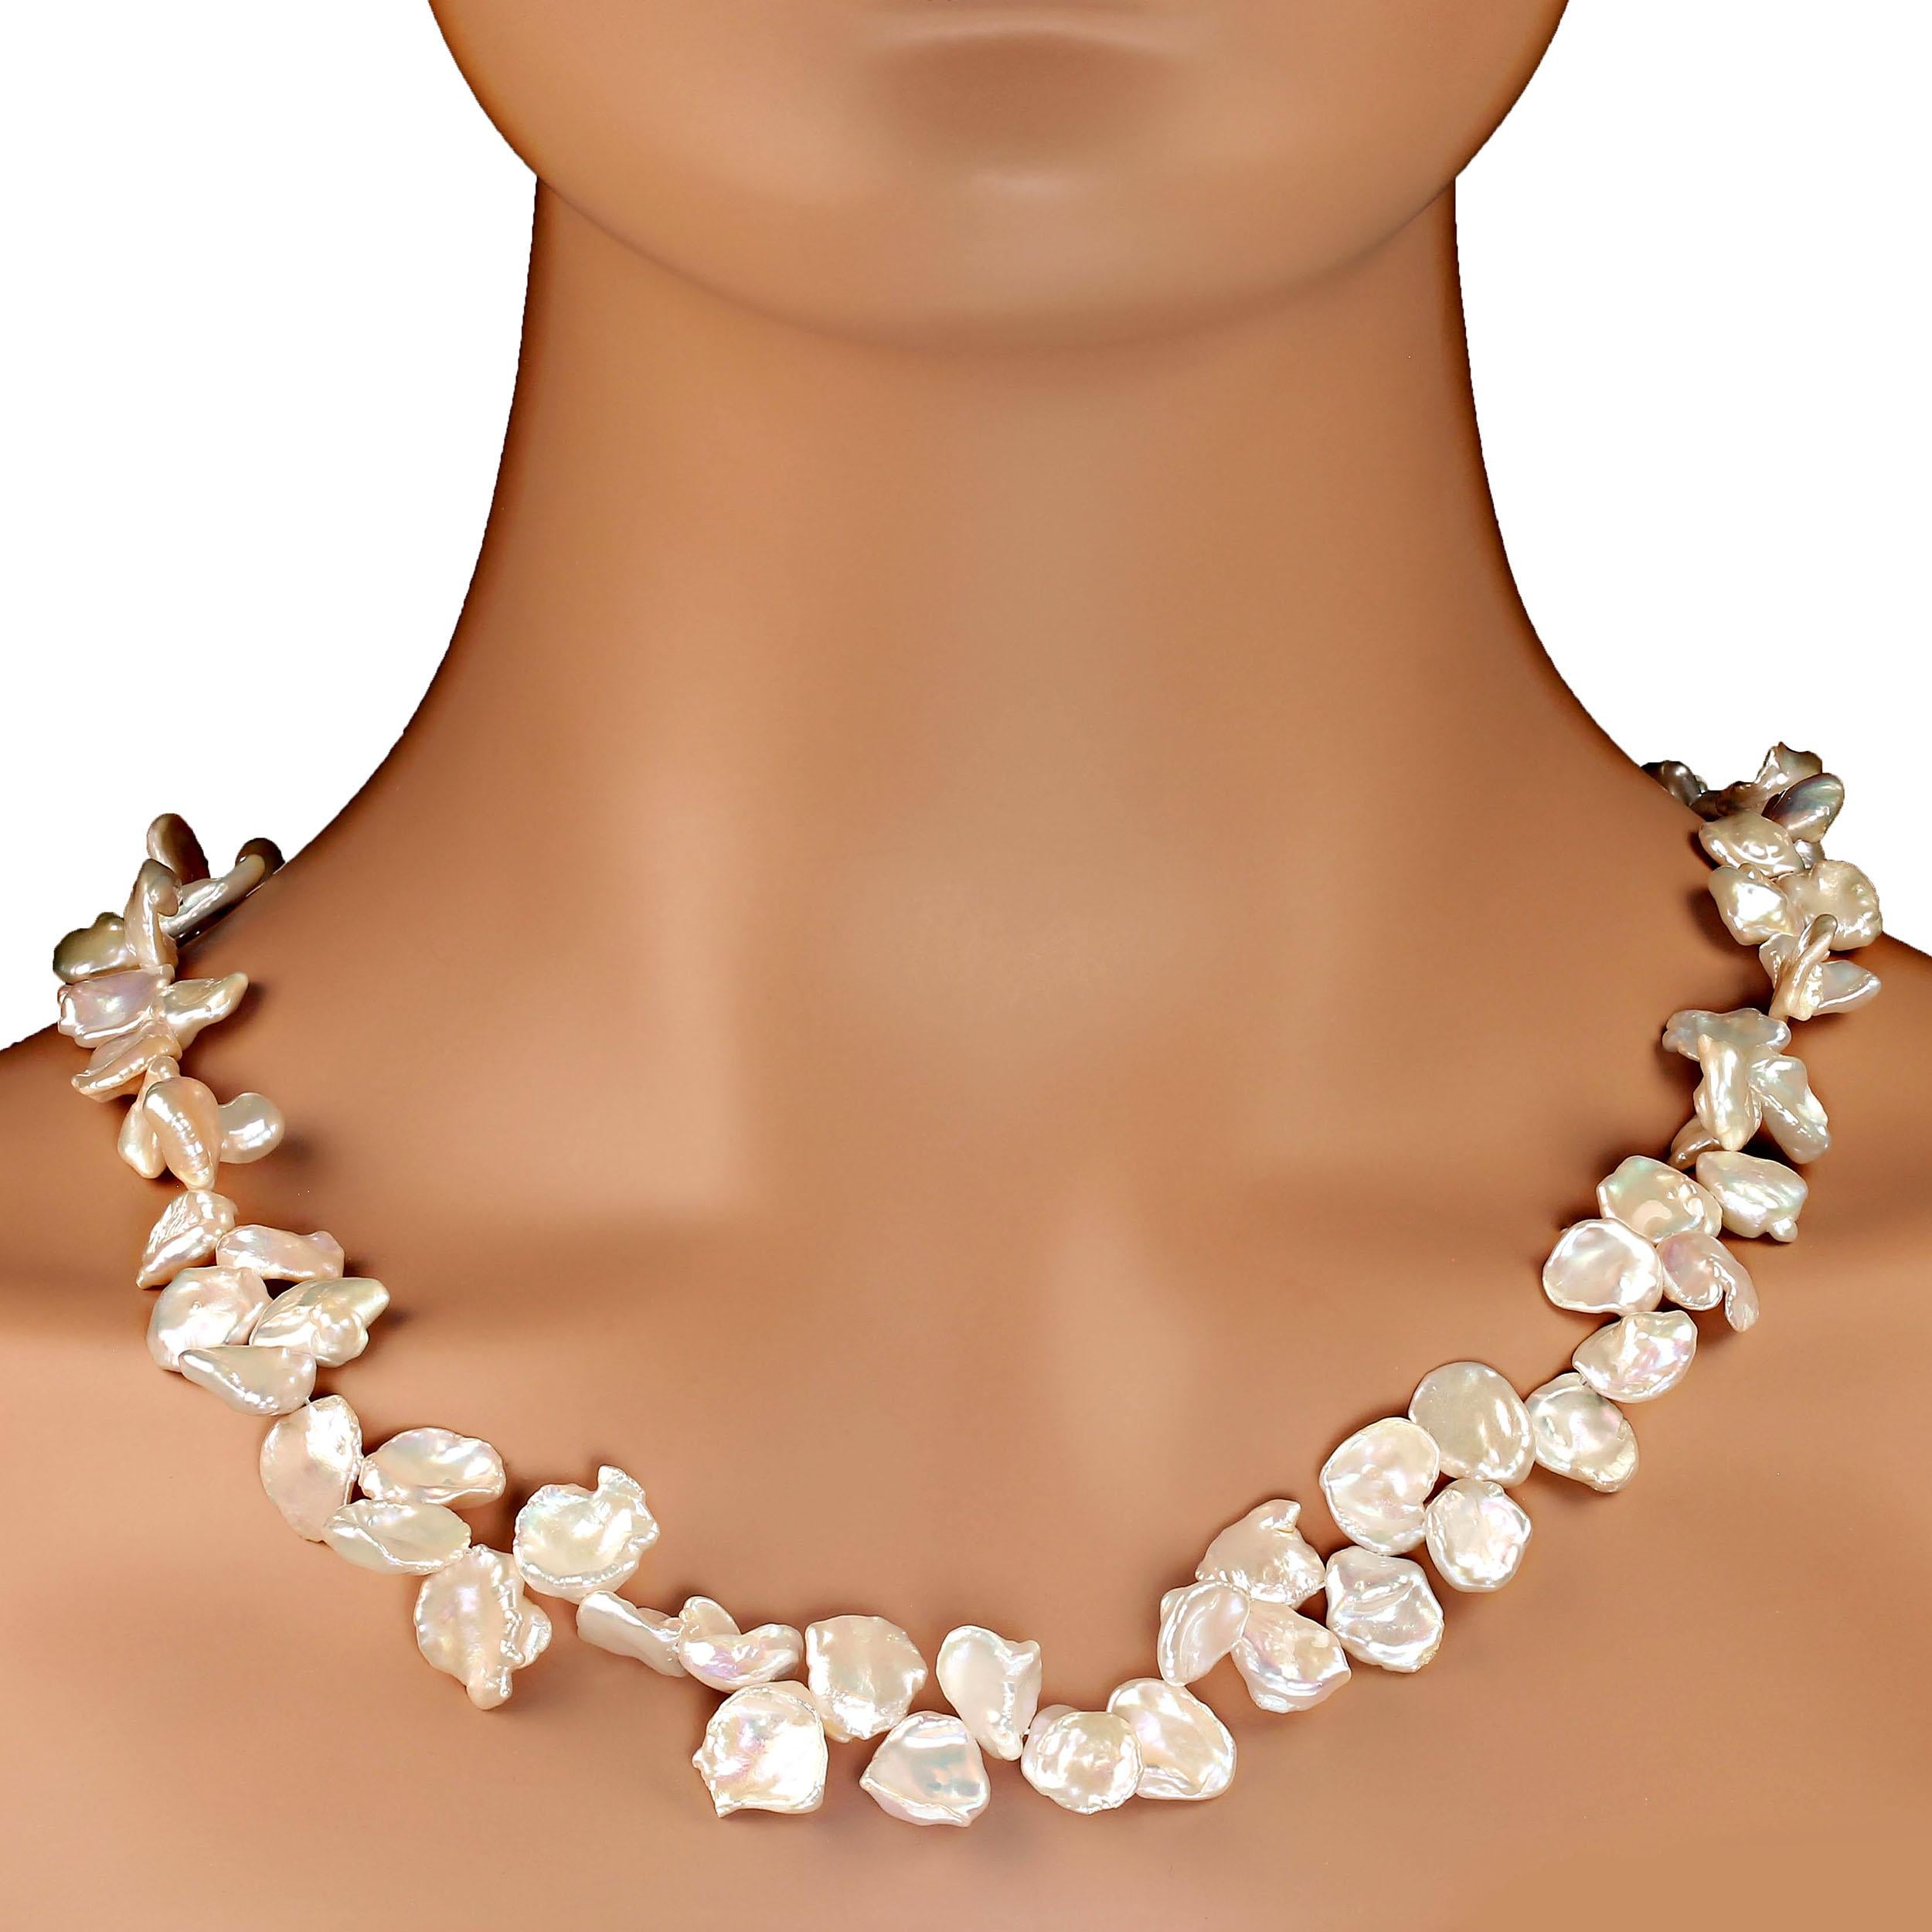 23 Inch White Iridescent Keshi Pearl necklace that is gently graduated from 9 to 14 mm.  These flatish, roundish gorgeous pearls are such a pleasure to wear. They glow and iridesce and create quite a presence.
The necklace is secured with an